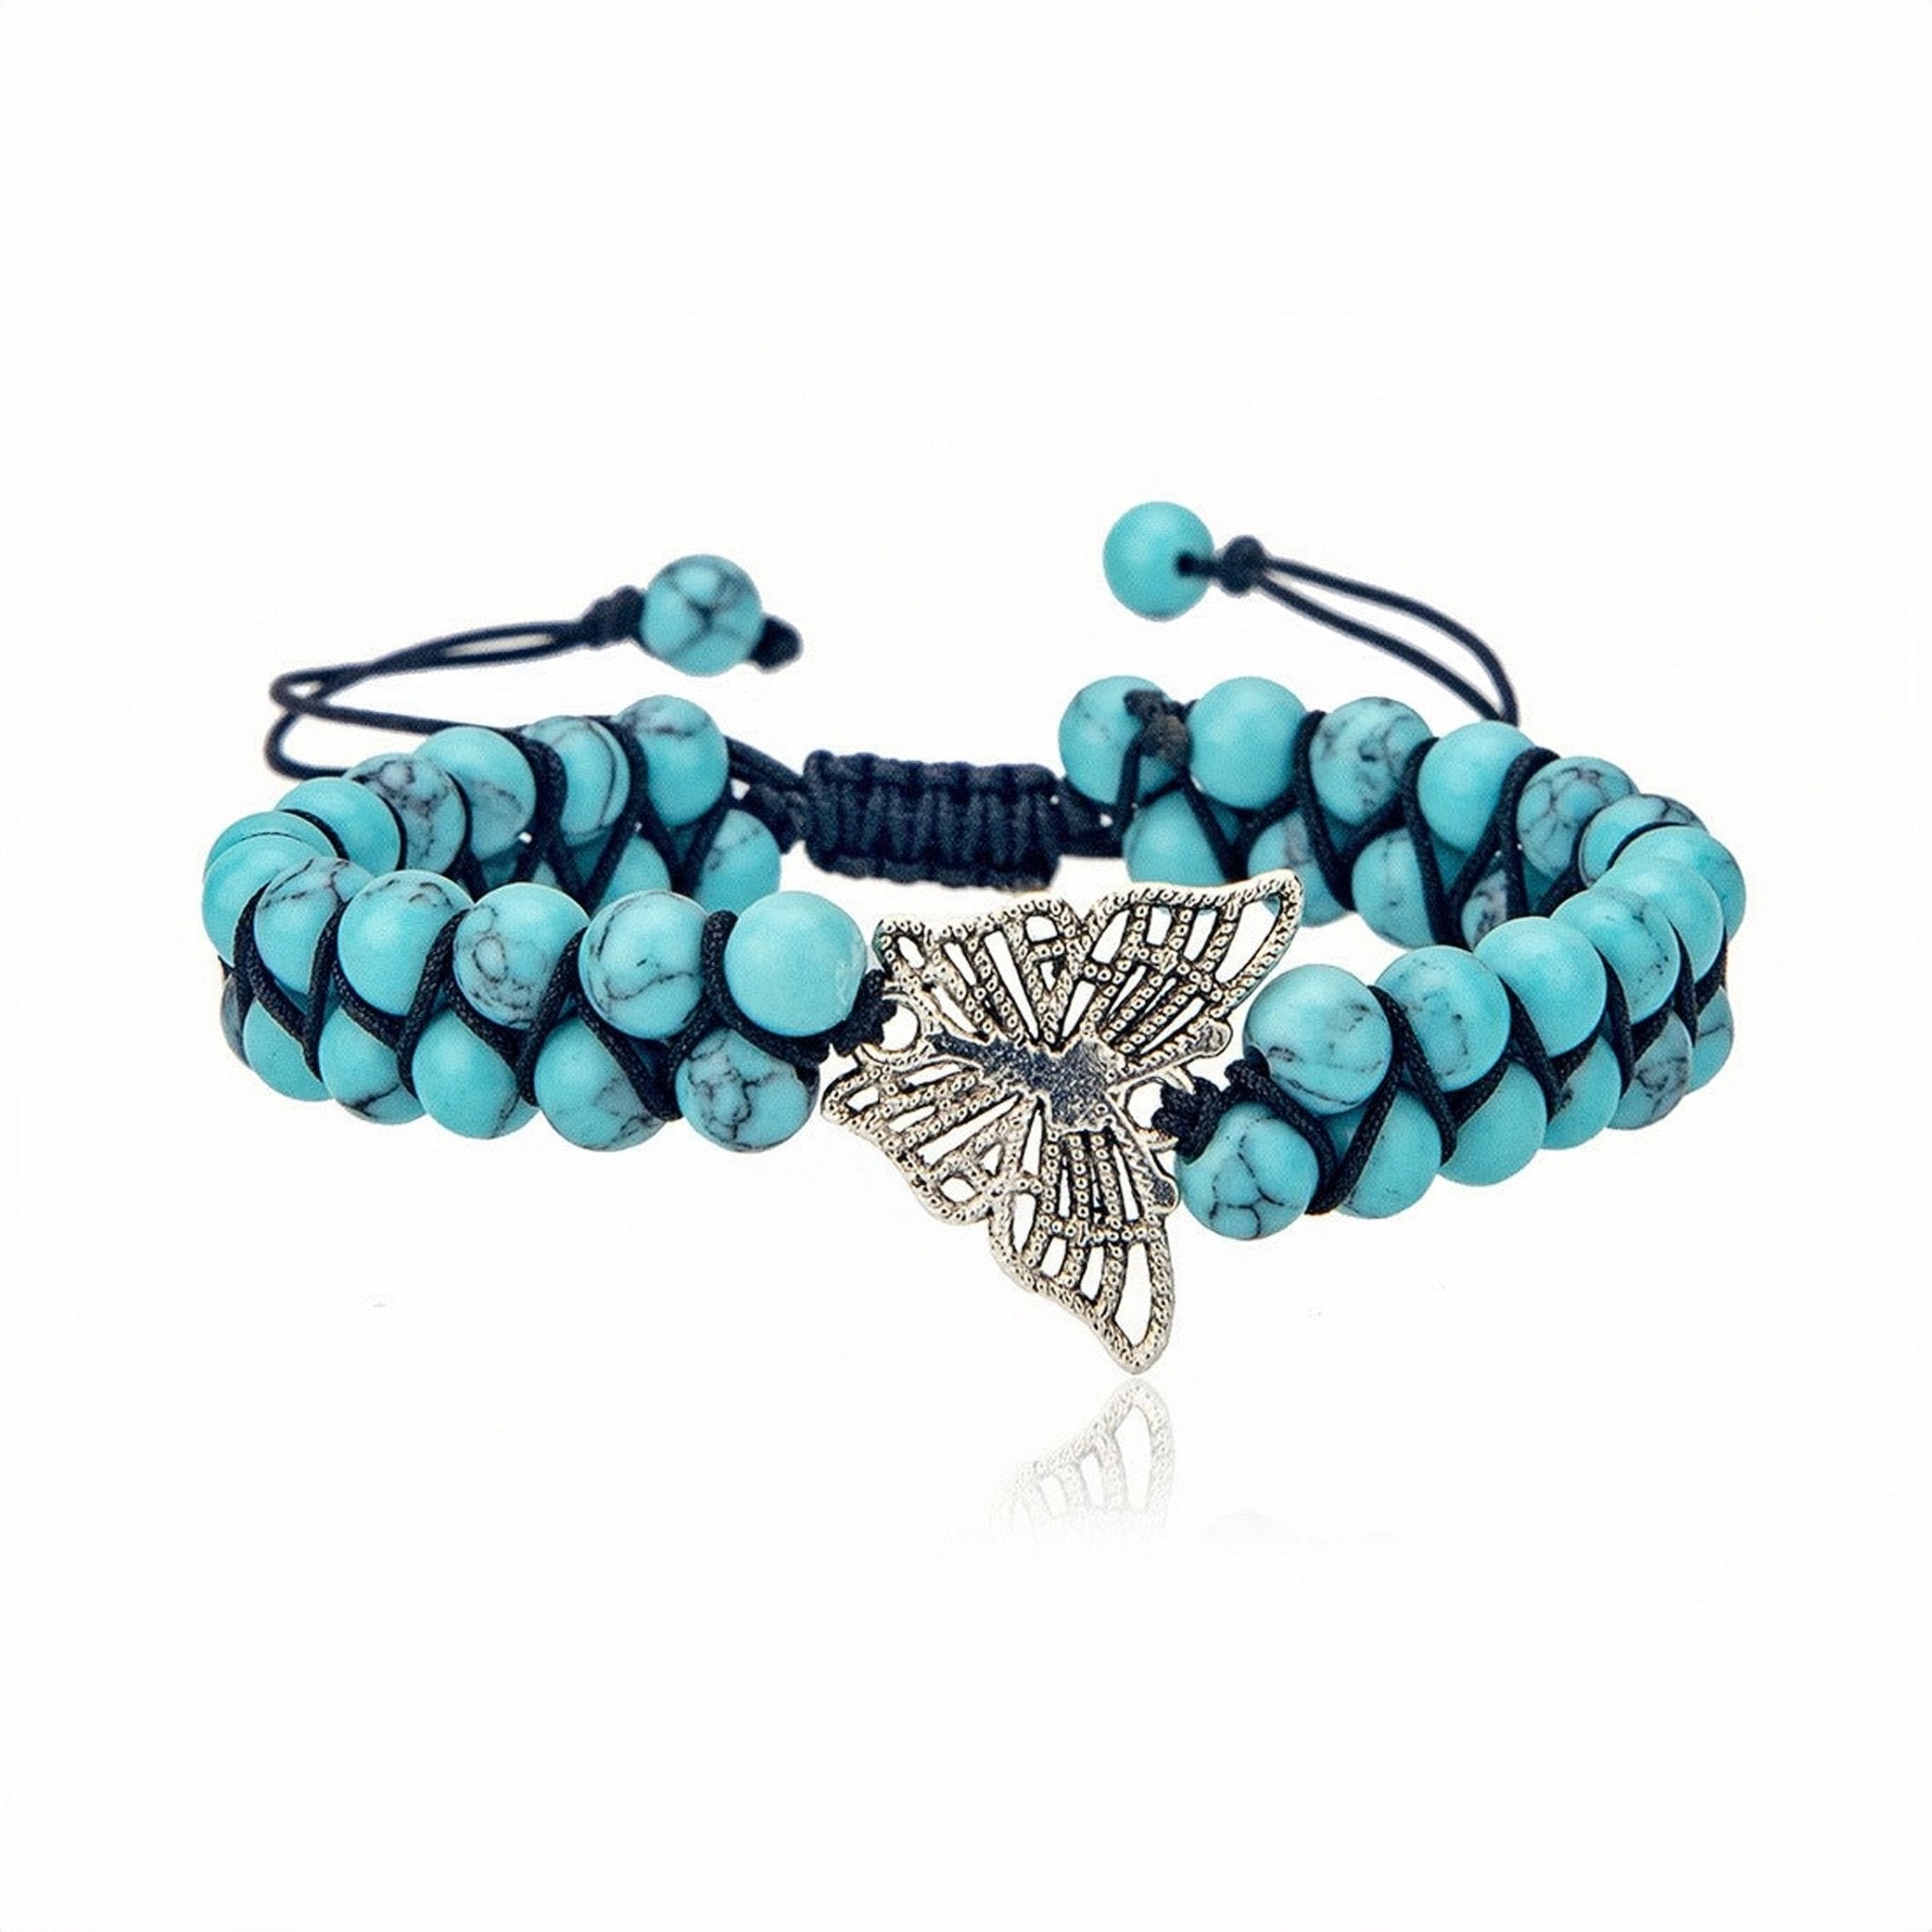 Double-row turquoise yoga bracelet with a central silver butterfly charm, presented on a white background.